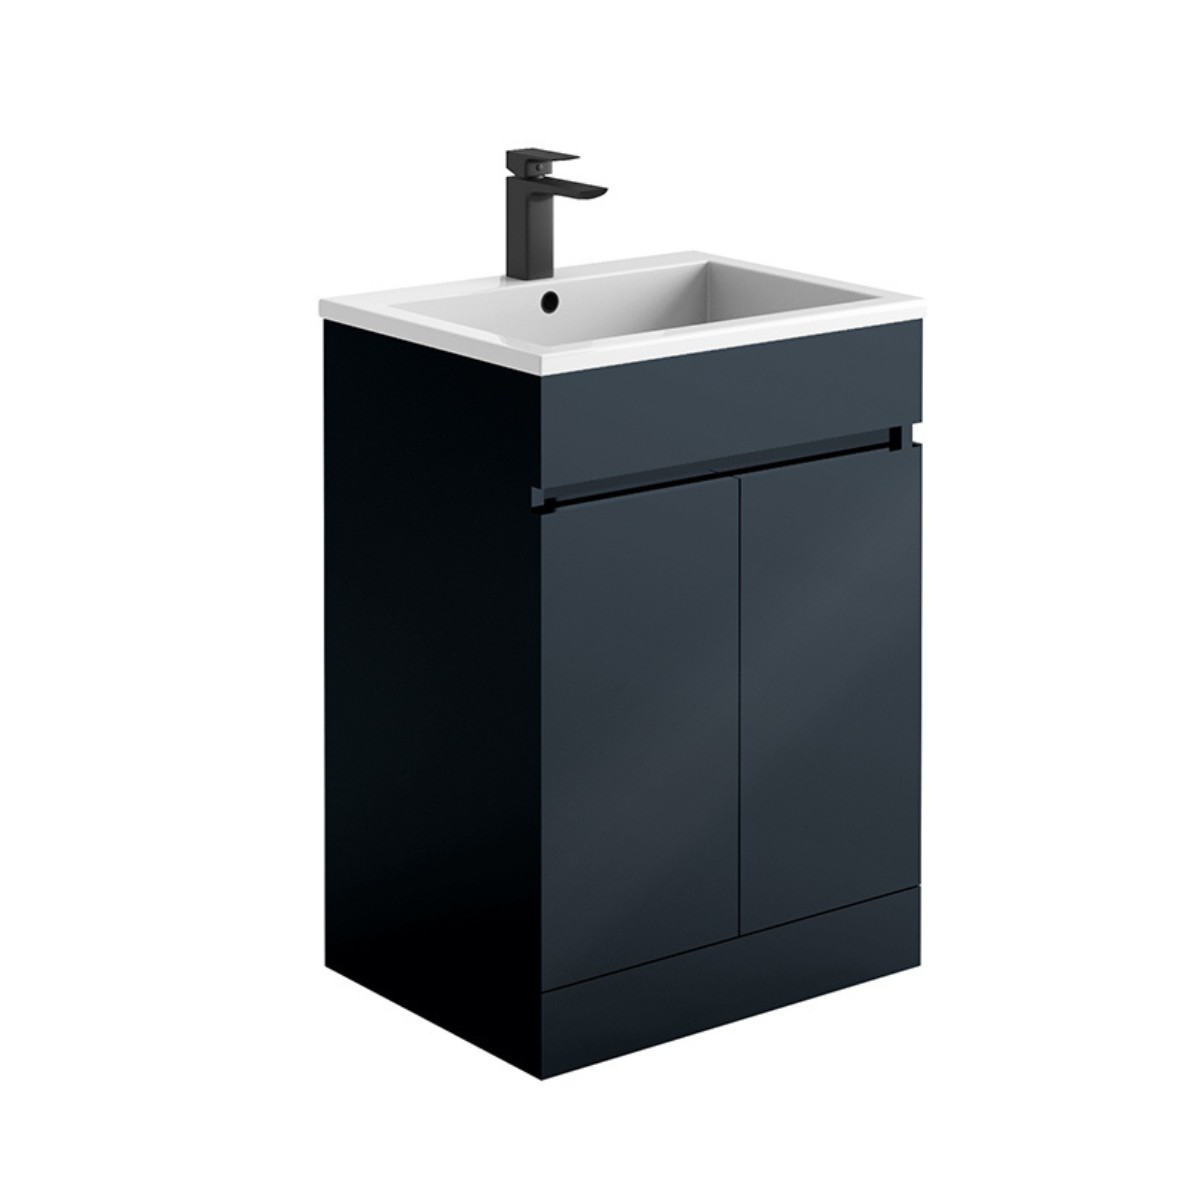 Empire 600 Anthracite Vanity Unit with Basin set